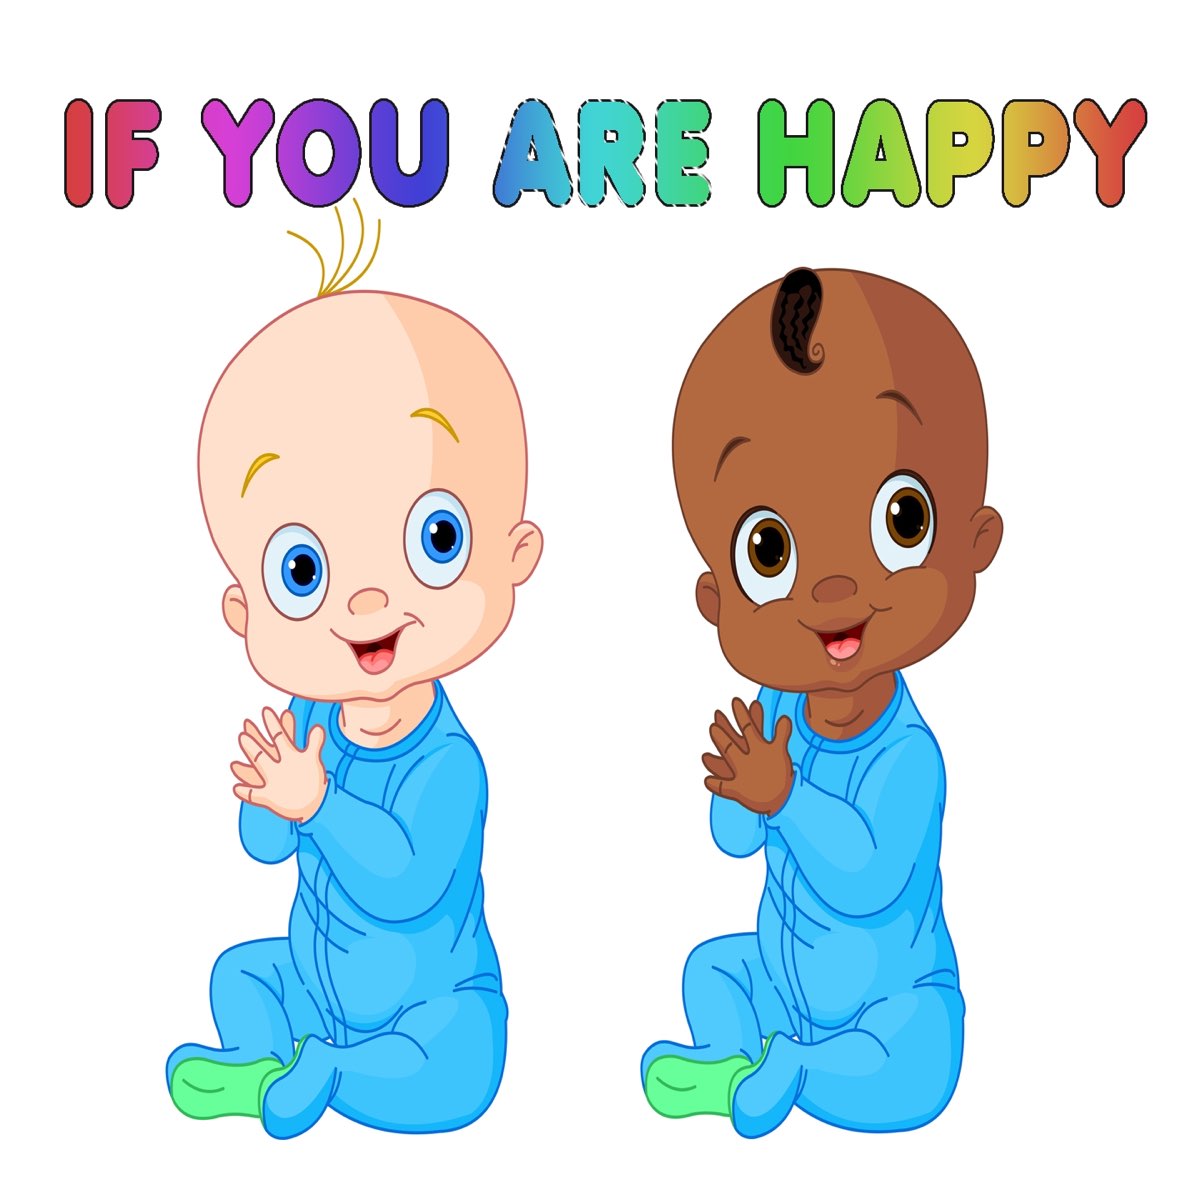 If you are happy clap. You are Happy картинка для детей. Julie Ellis. Happy Clap your hands. If you Happy and you know it Clap your hands текст.